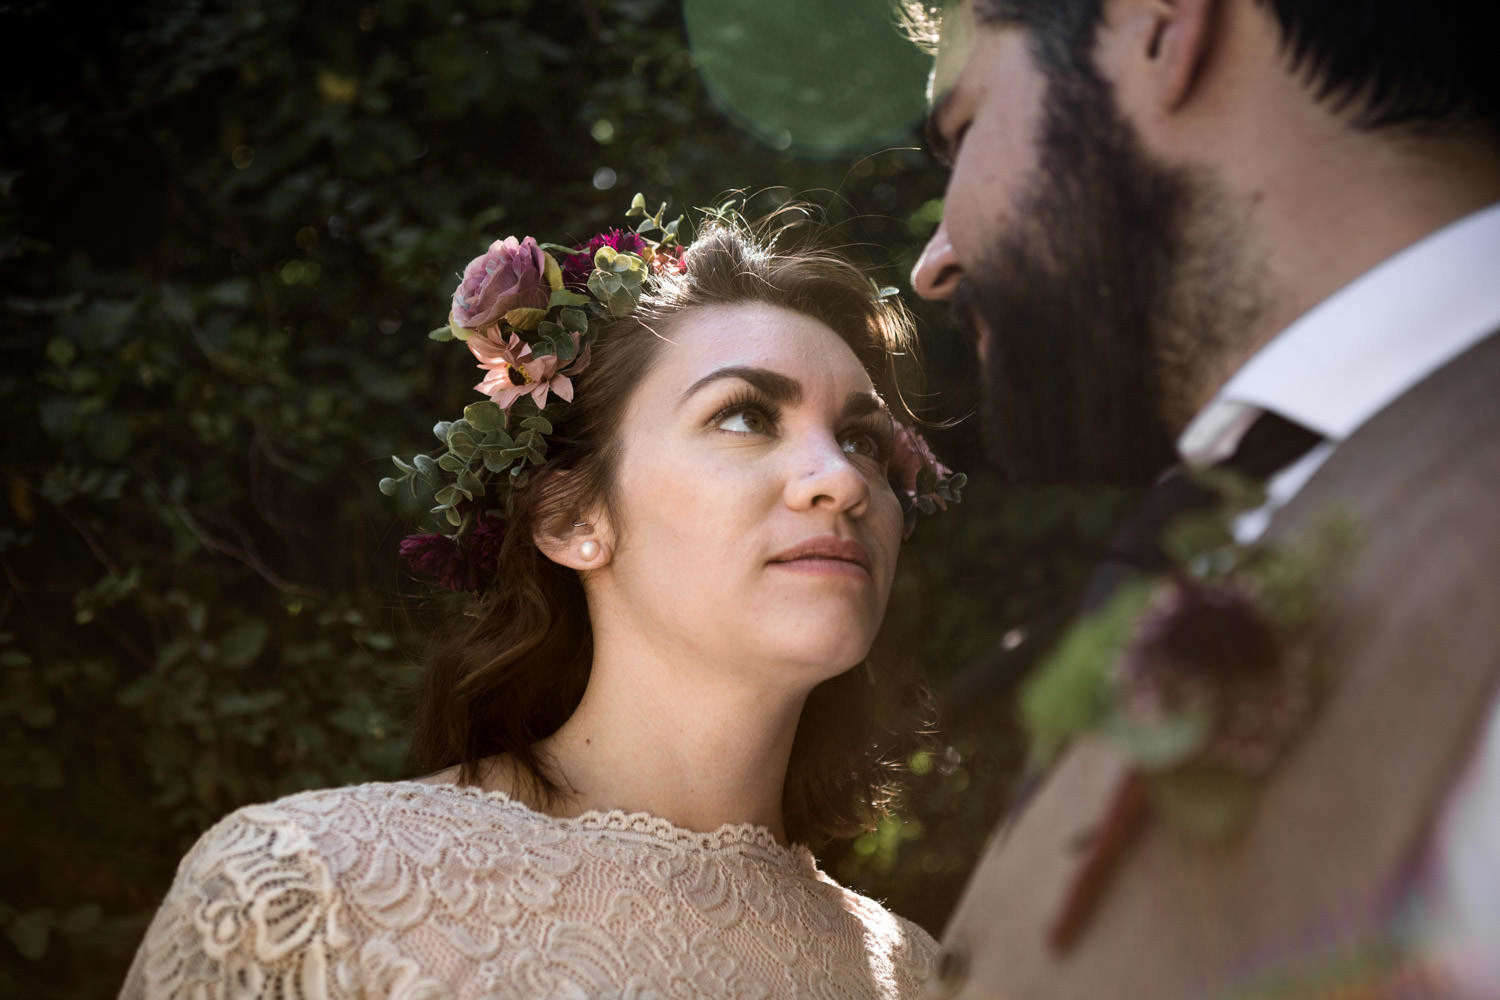 Discovery Park Elopement in Seattle Washington by Danielle Motif Photography